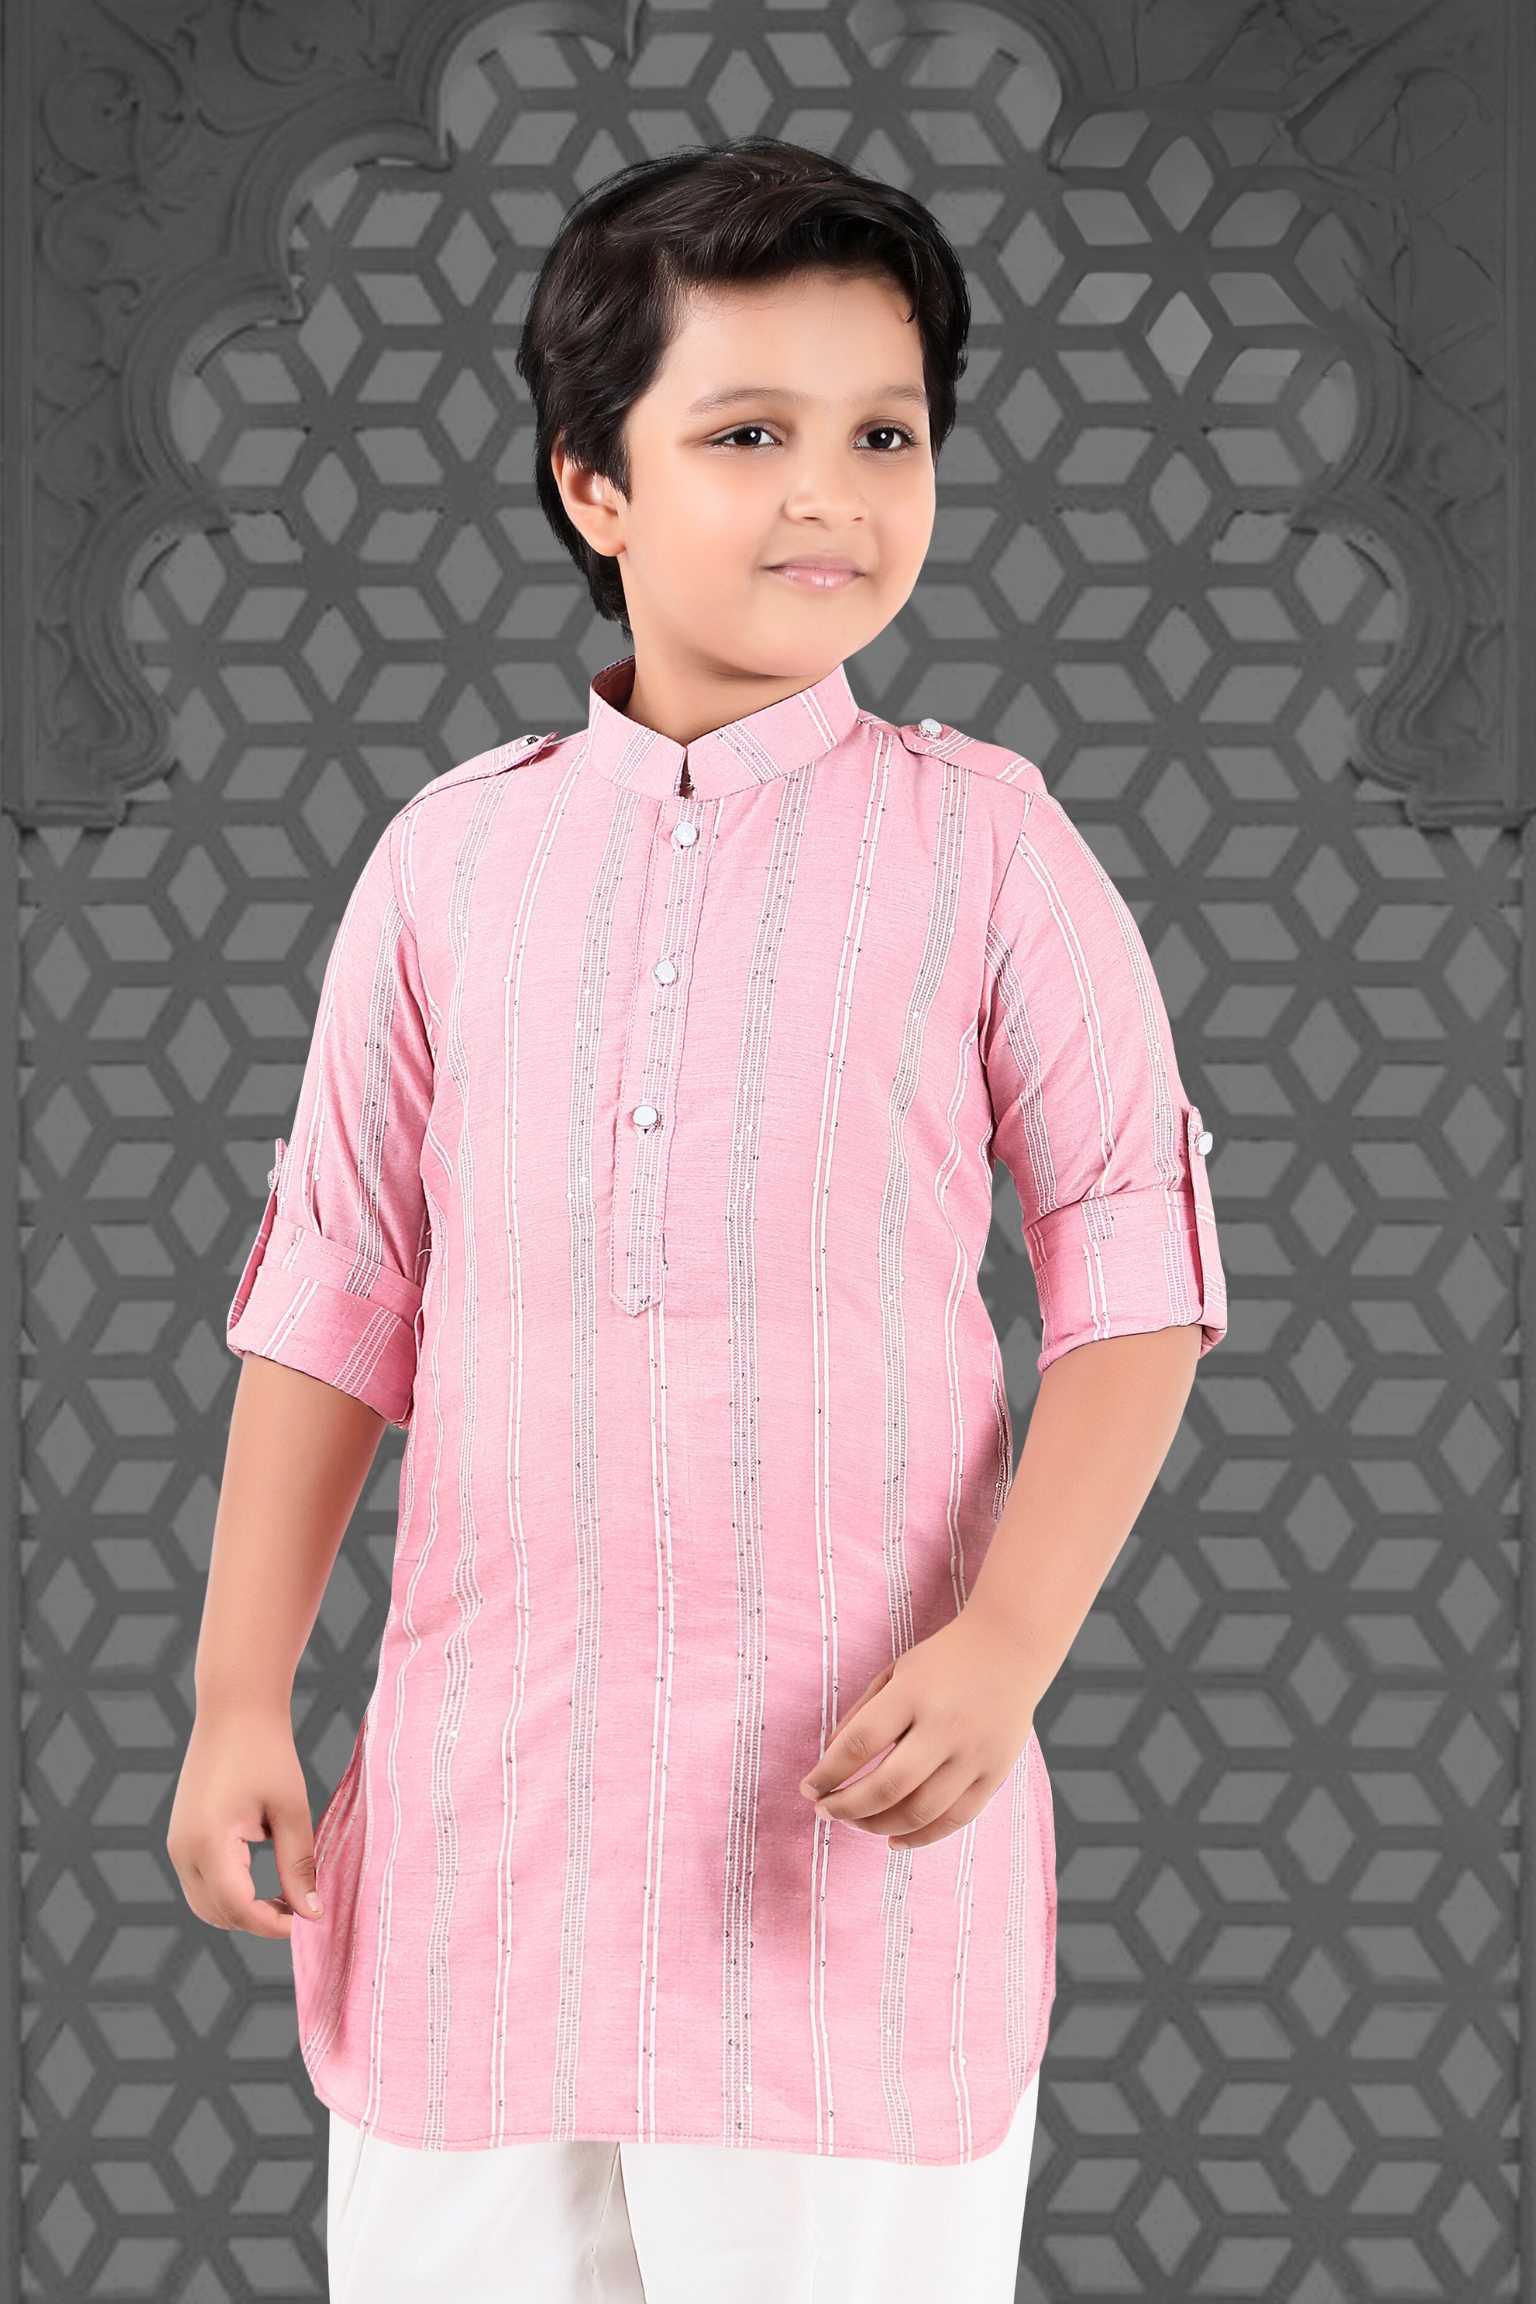 Pink Pathani Set With White Pant For Boys - Lagorii Kids